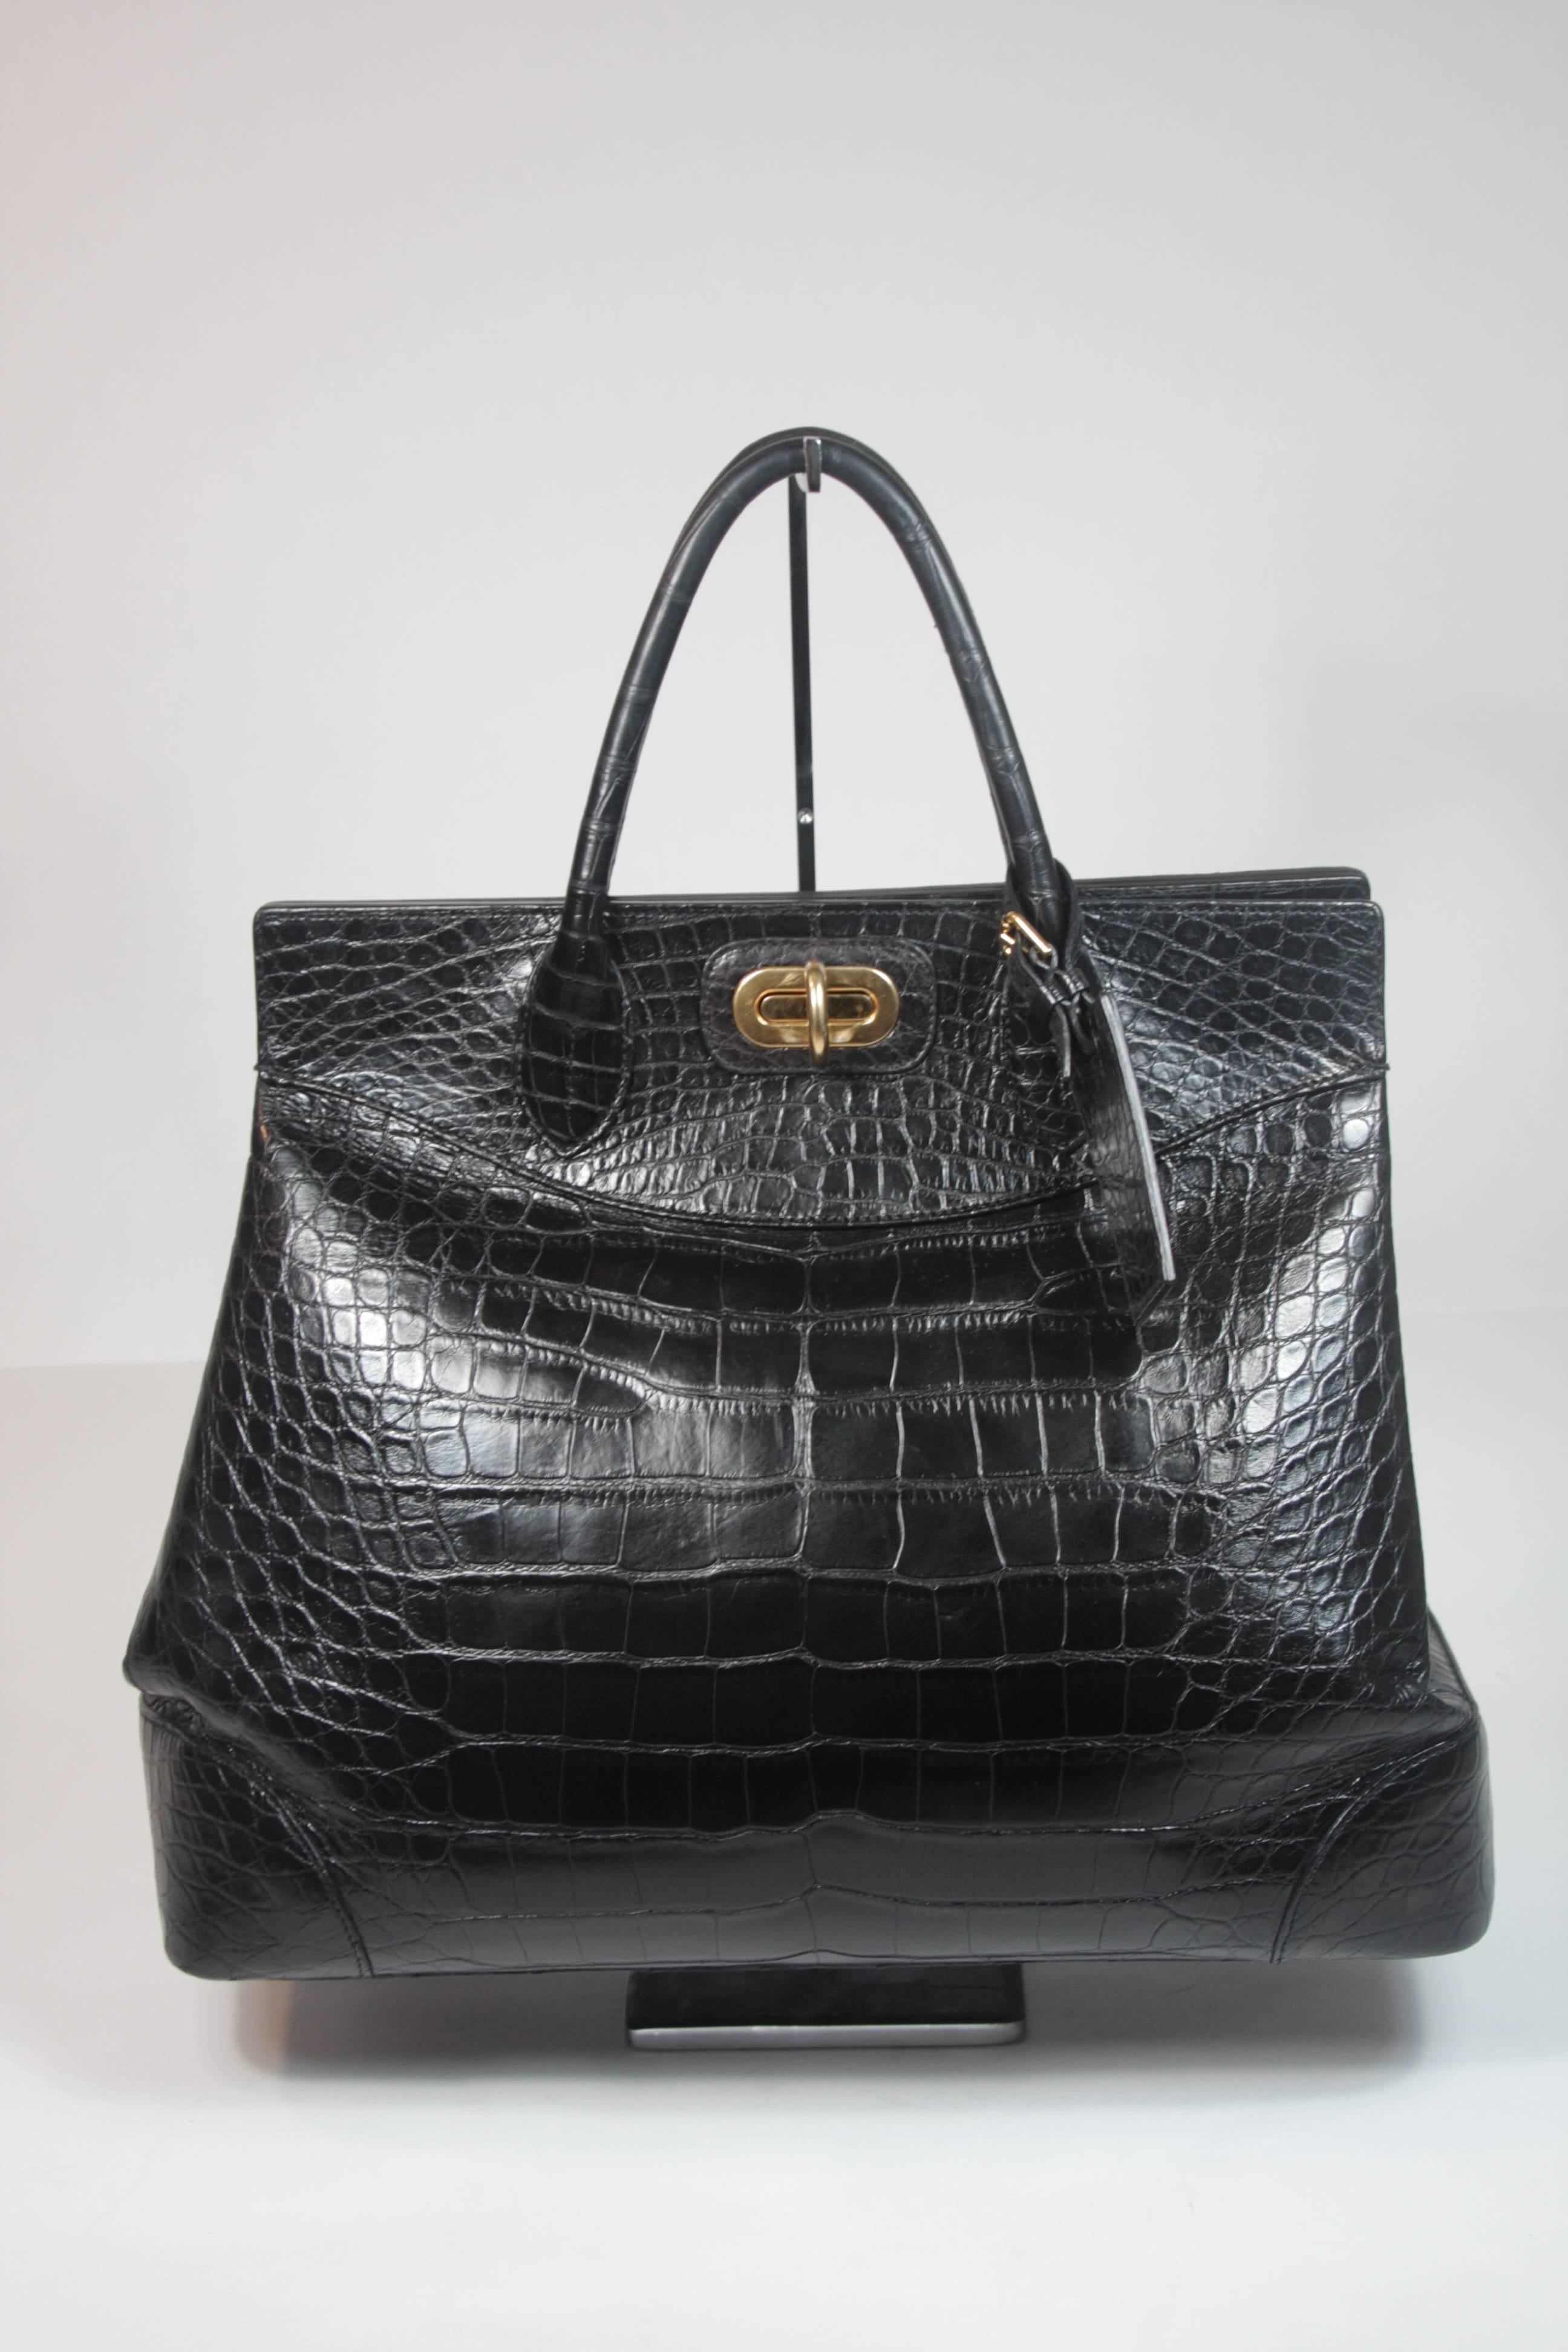 This Ralph Lauren design is available for viewing at our Beverly Hills Boutique. We offer a large selection of evening gowns and luxury garments. 

 This handbag is composed of a black alligator and features gold hardware. The double top handle